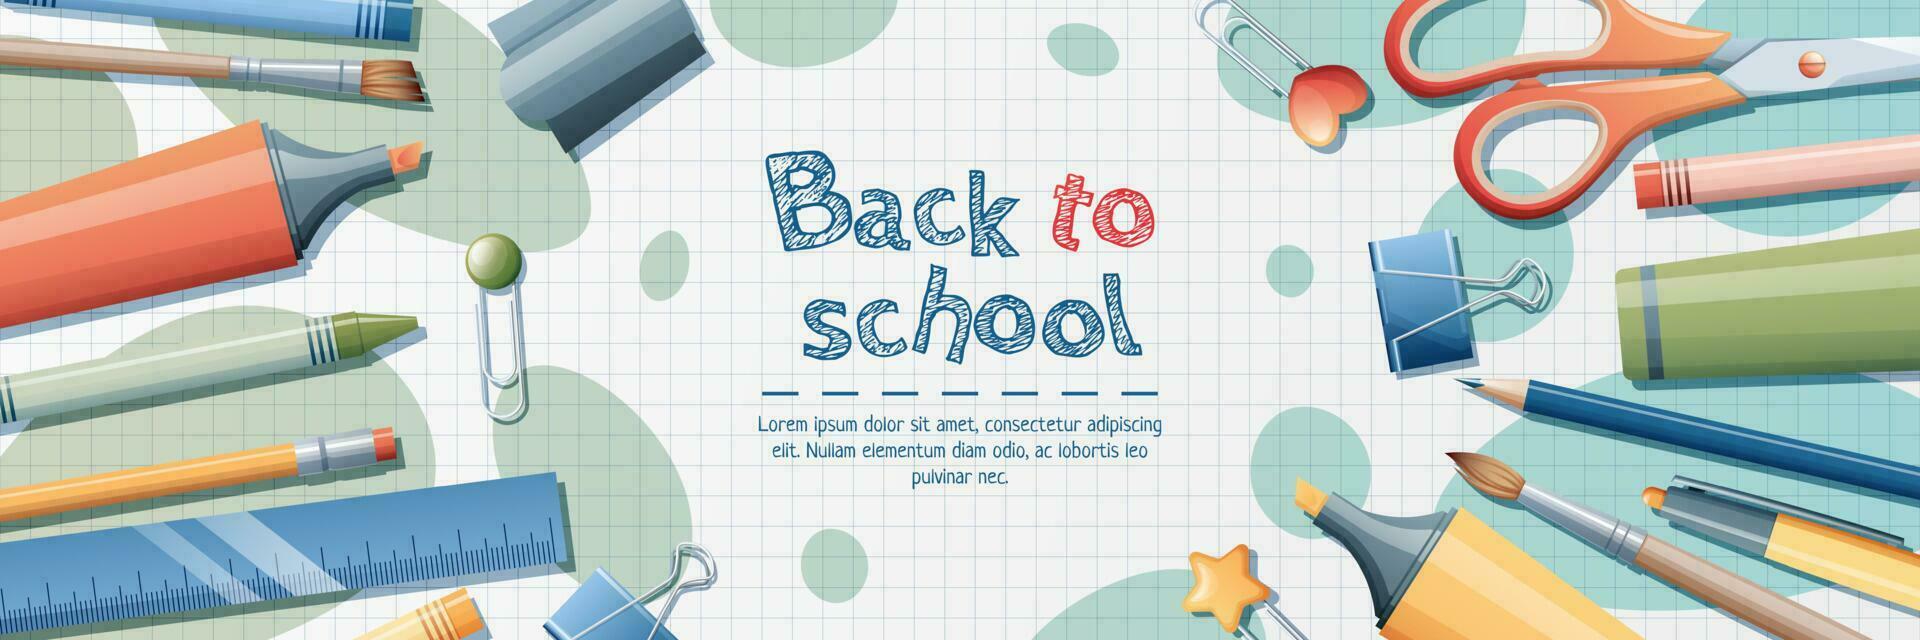 Back to school banner template. Background with stationery pencils, pen, brush, scissors, paper clips. School theme, knowledge day, study vector